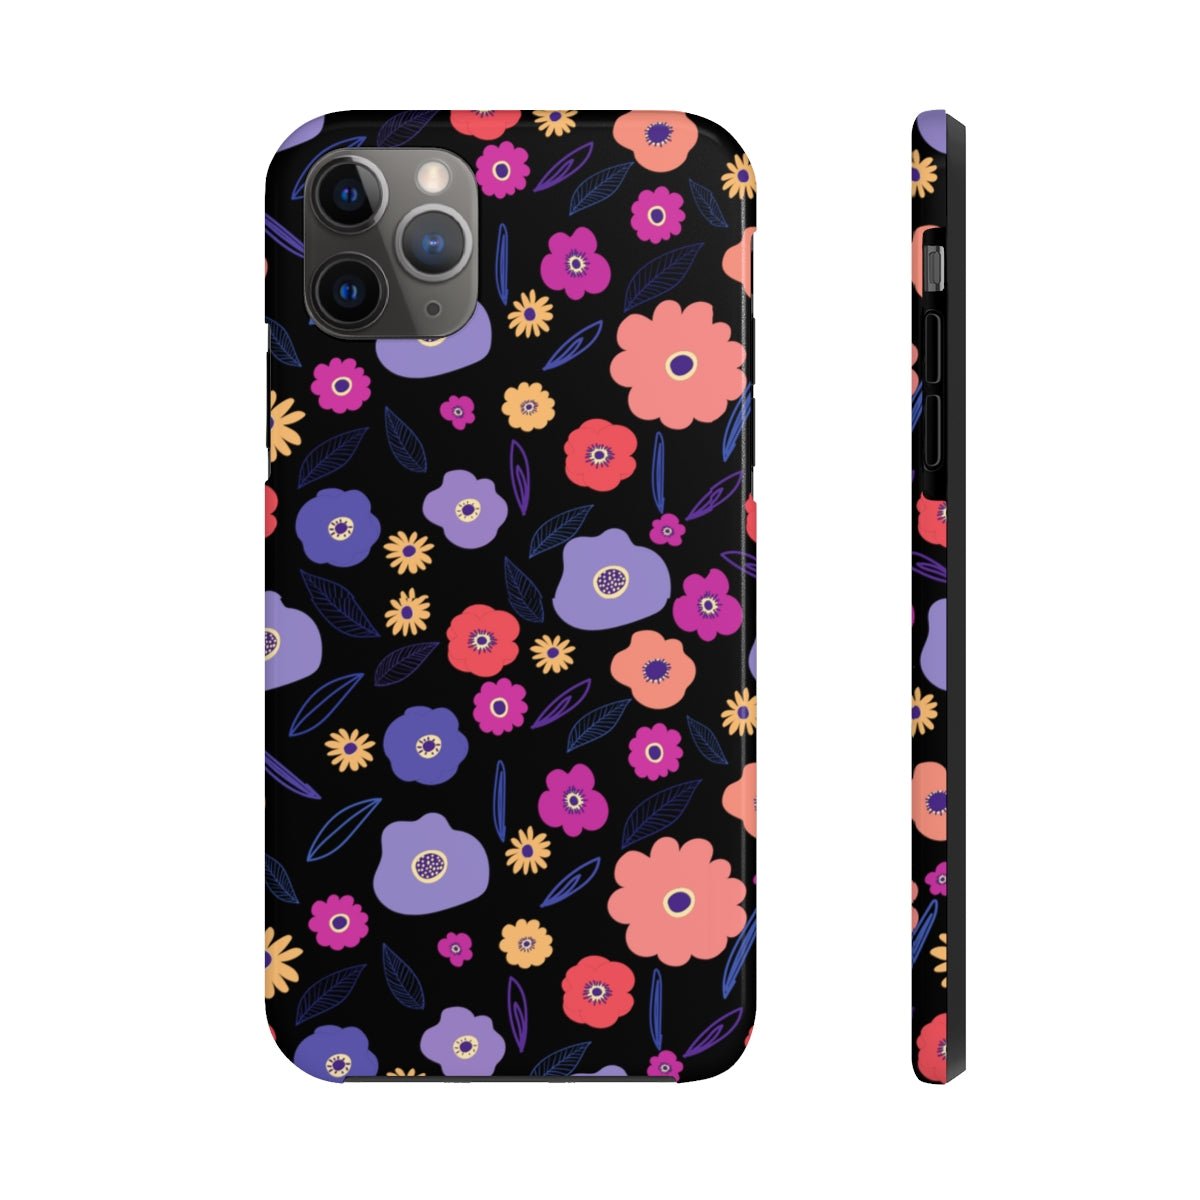 Keep Going Keep Growing Dark Floral Tough Phone Cases - The Kindness Cause